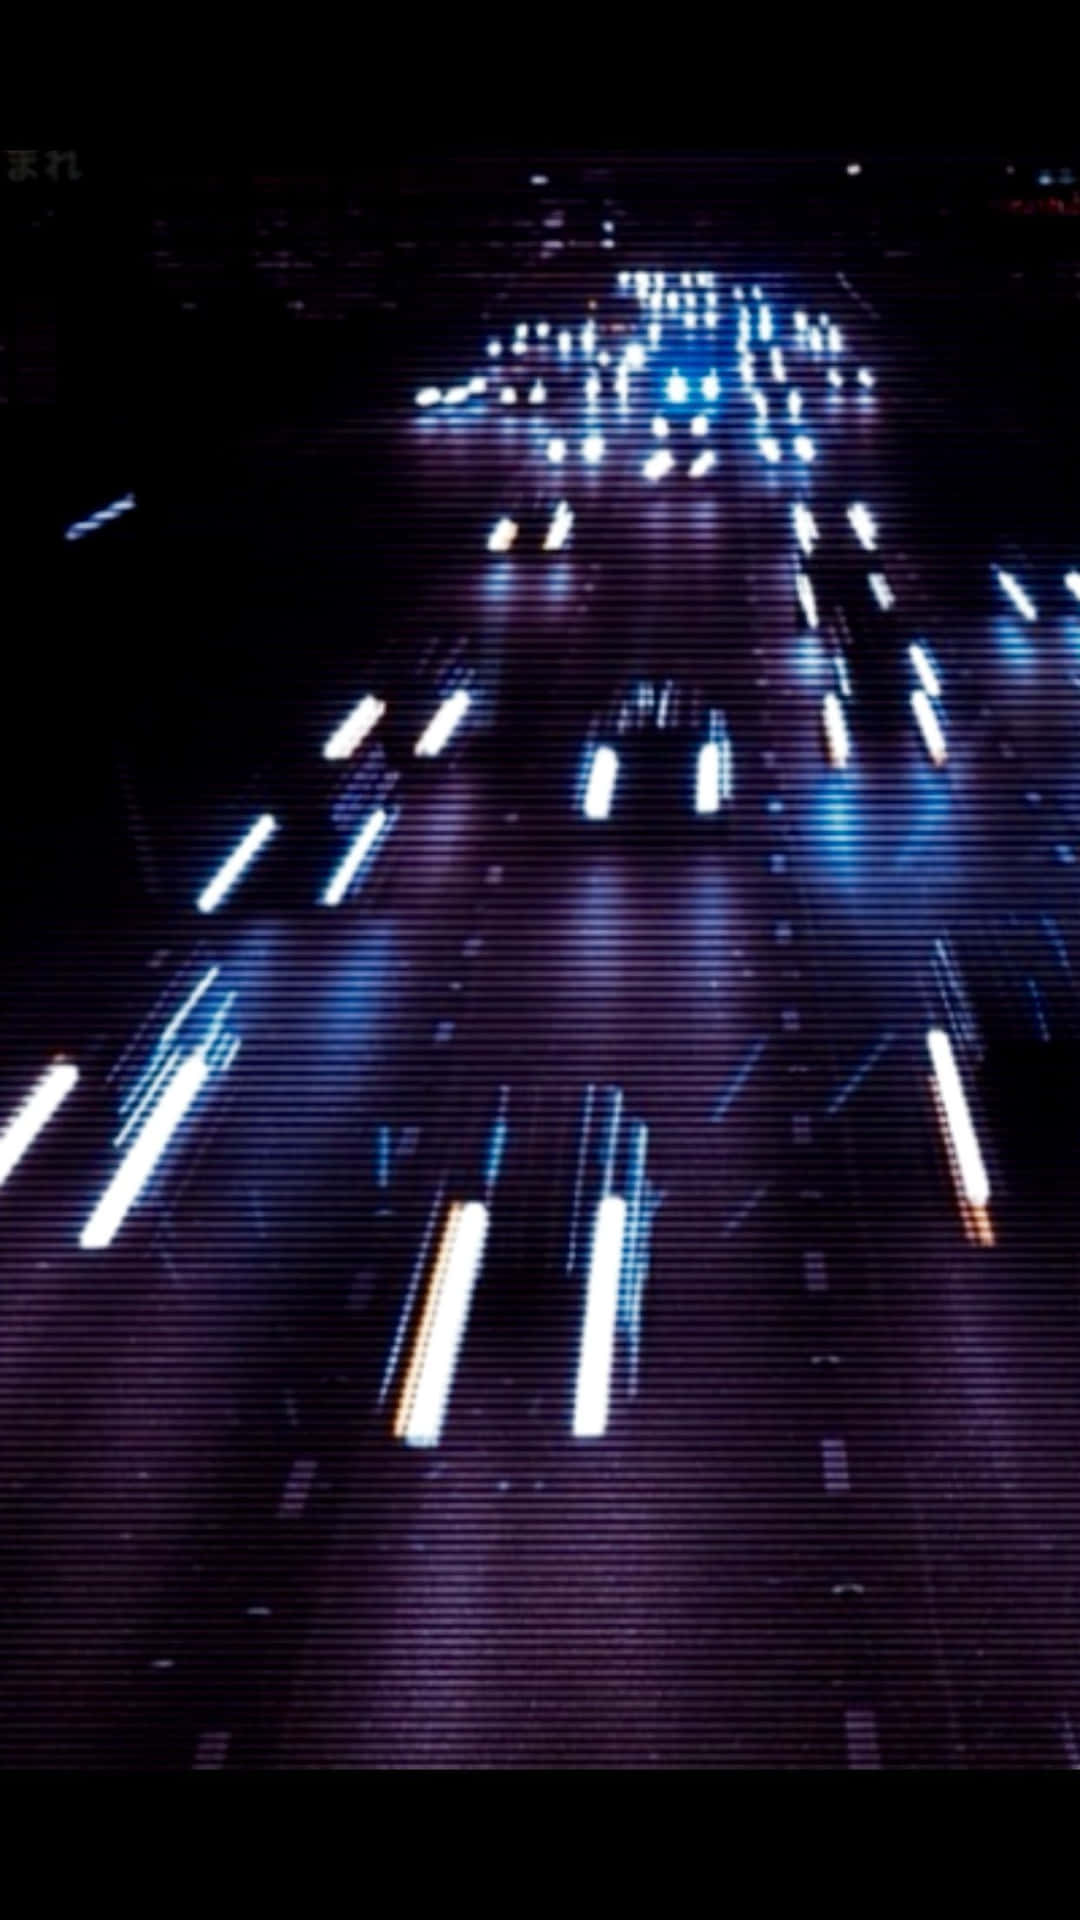 A Long Exposure Of Cars On A Highway At Night Wallpaper